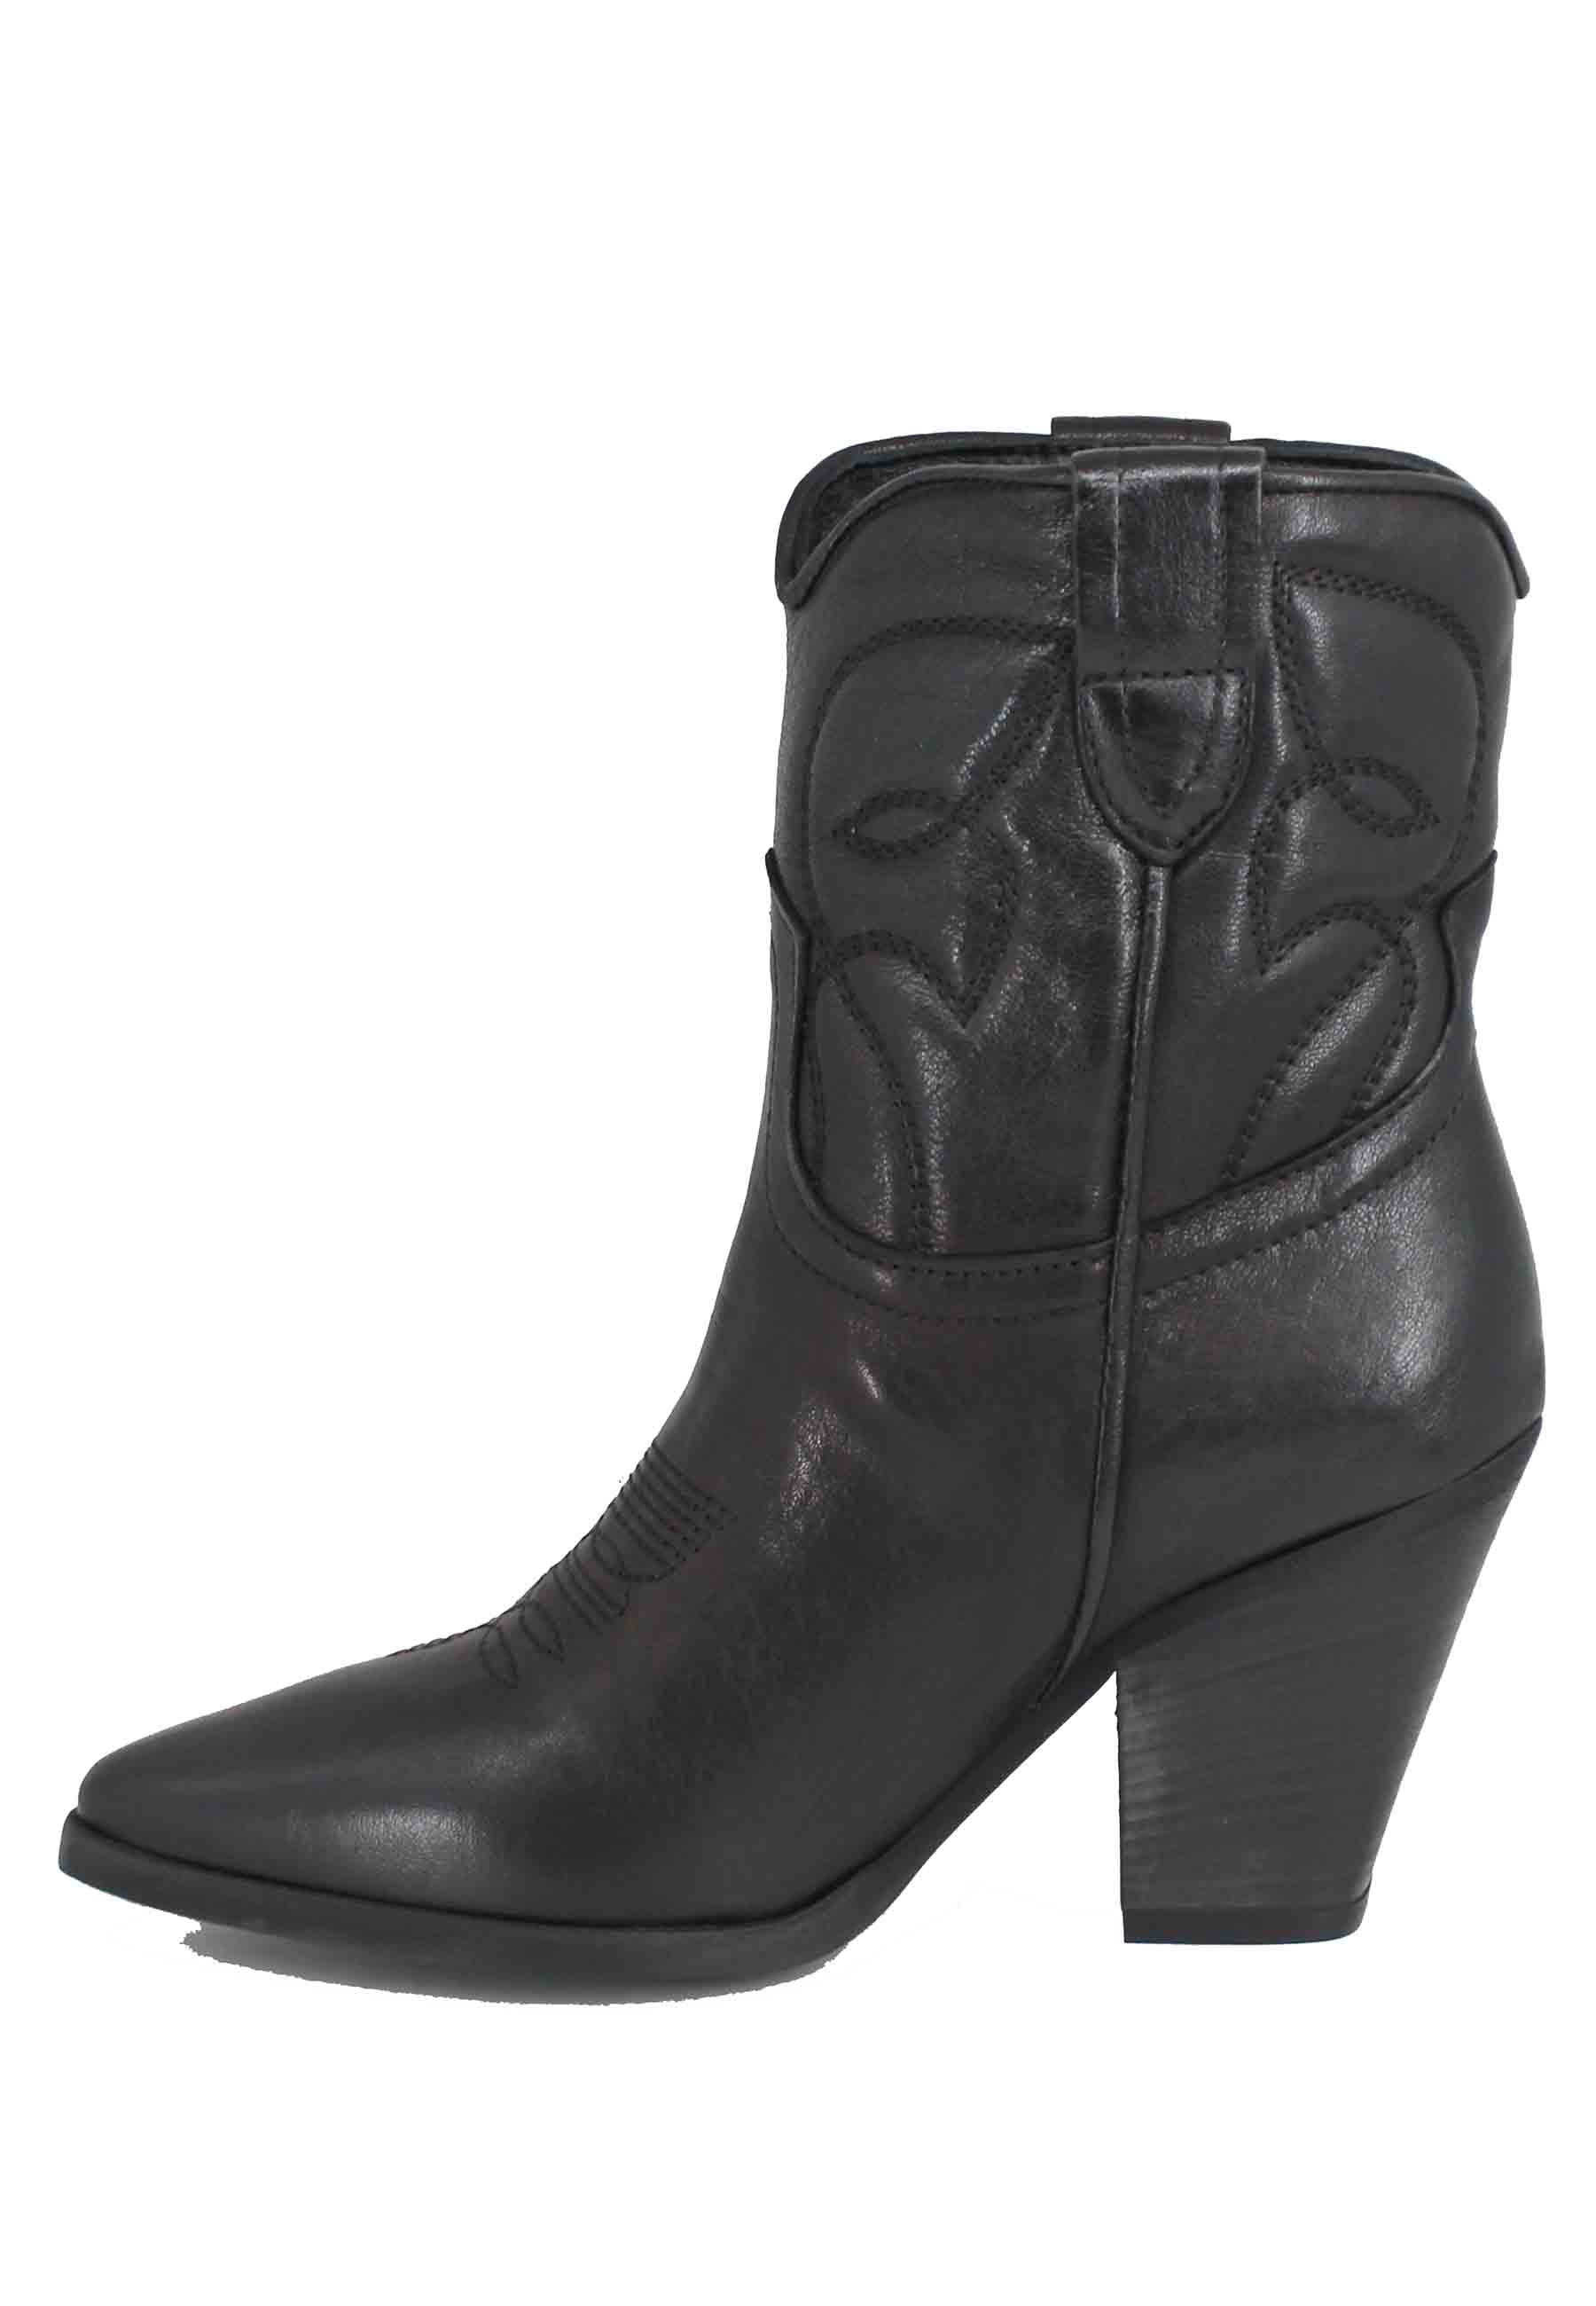 Women's Texan boots in black leather with high heel